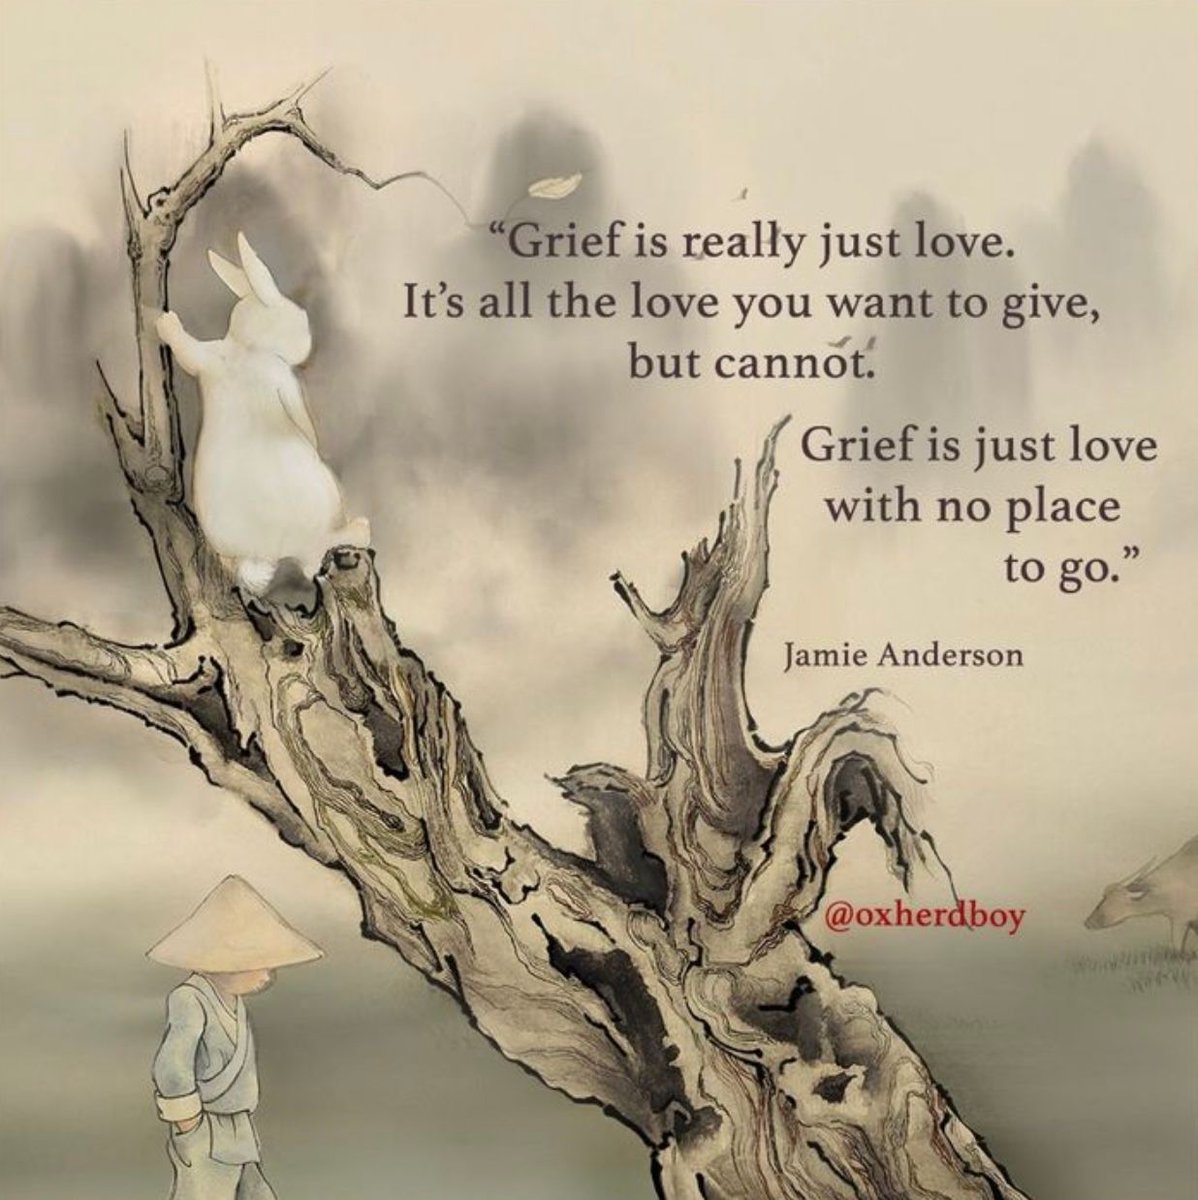 Grief is really just love. It's all the love you want to give, but cannot ... Grief is just love with no place to go. Jamie Anderson